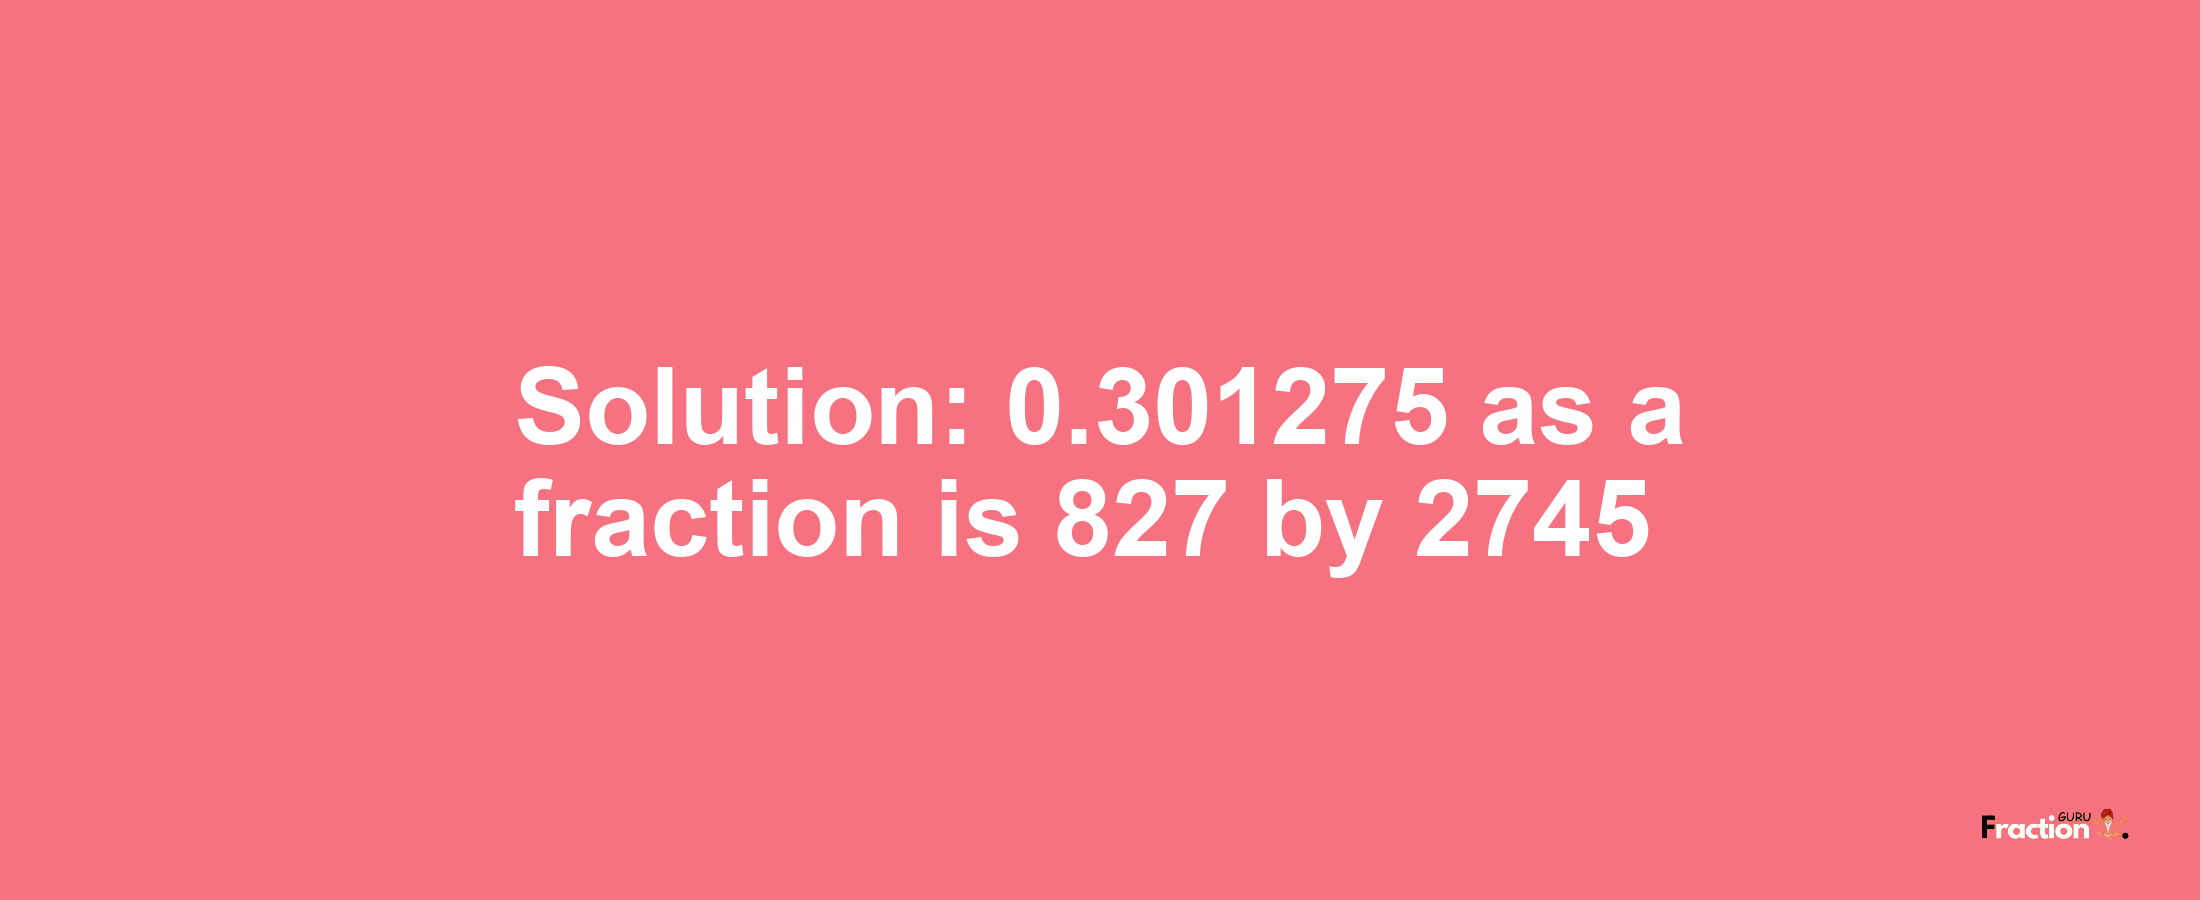 Solution:0.301275 as a fraction is 827/2745